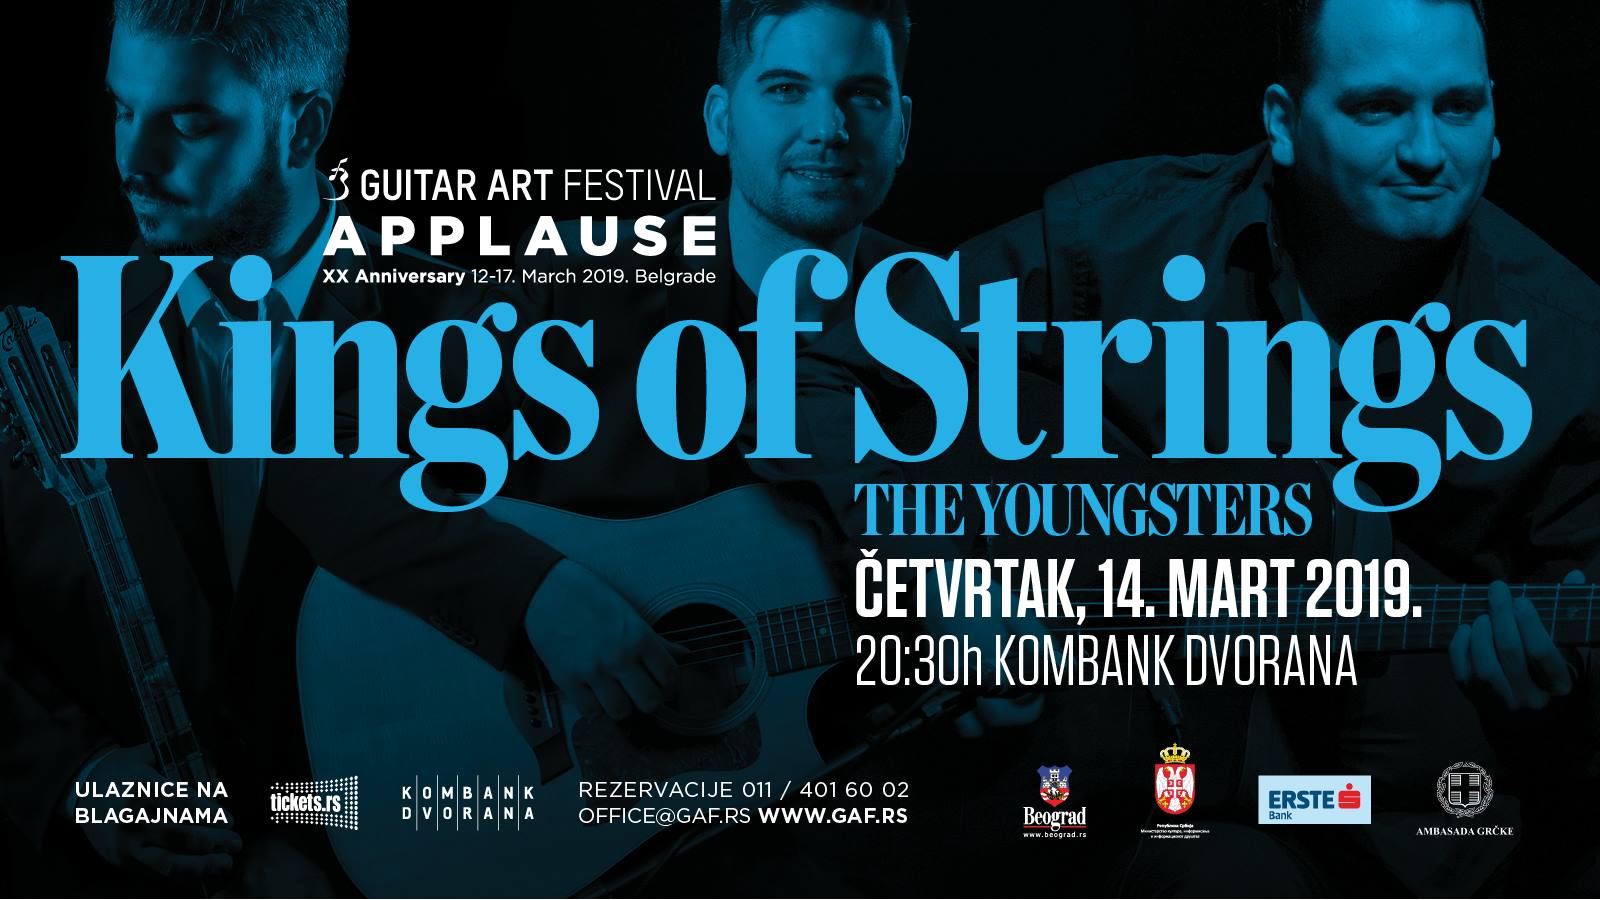 Kings of Strings The Youngsters 14.03.2019. Kombank dvorana